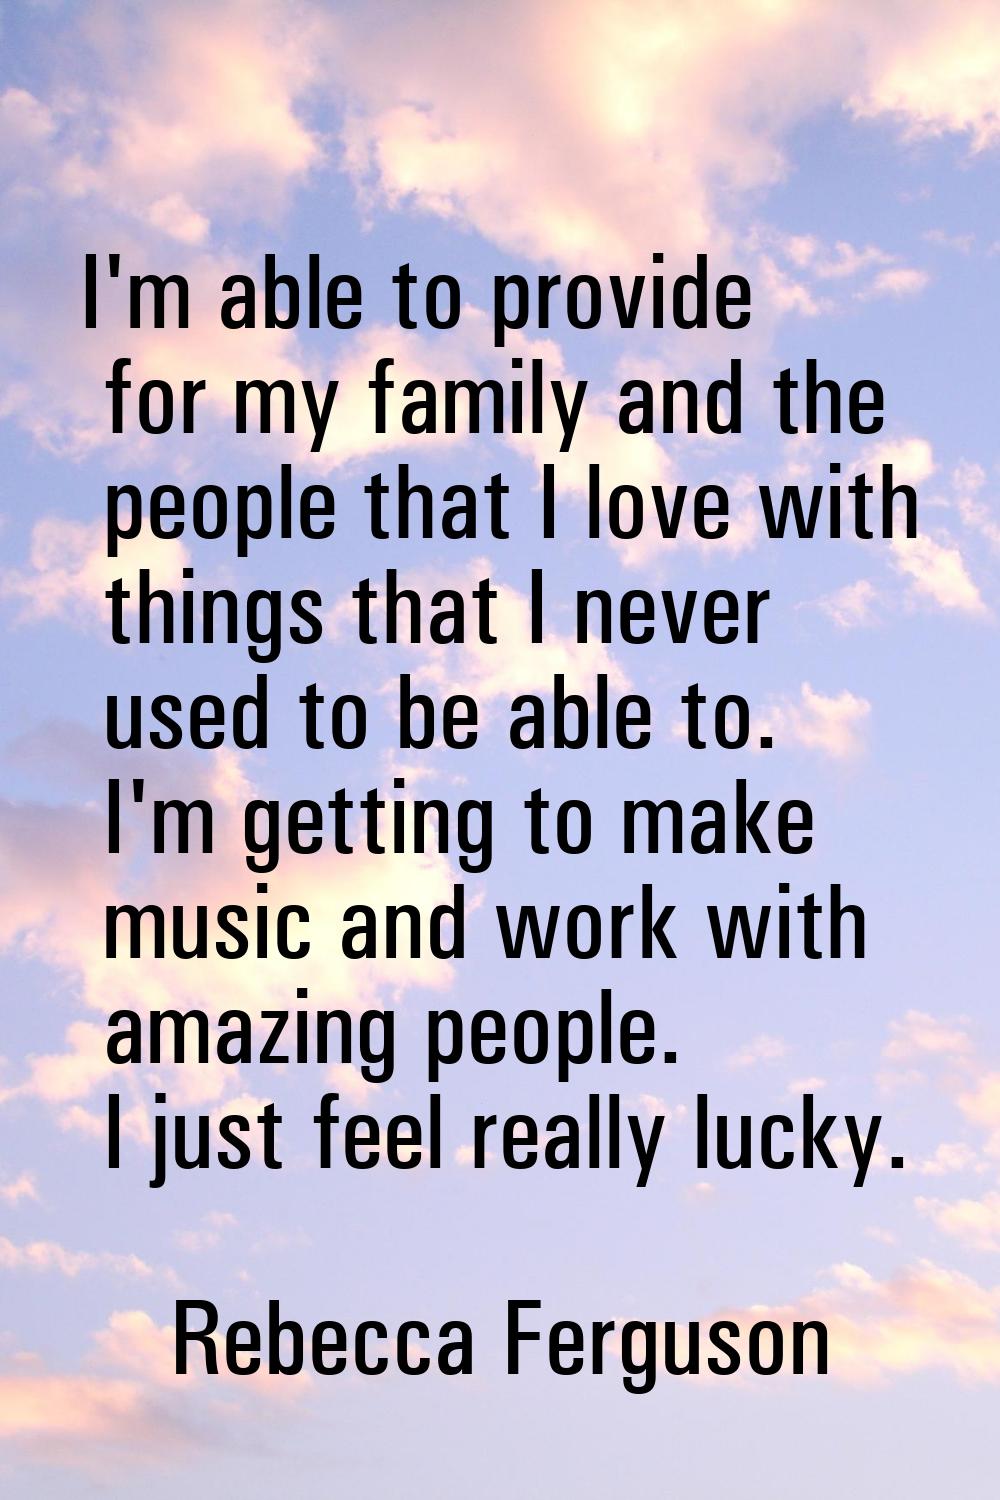 I'm able to provide for my family and the people that I love with things that I never used to be ab